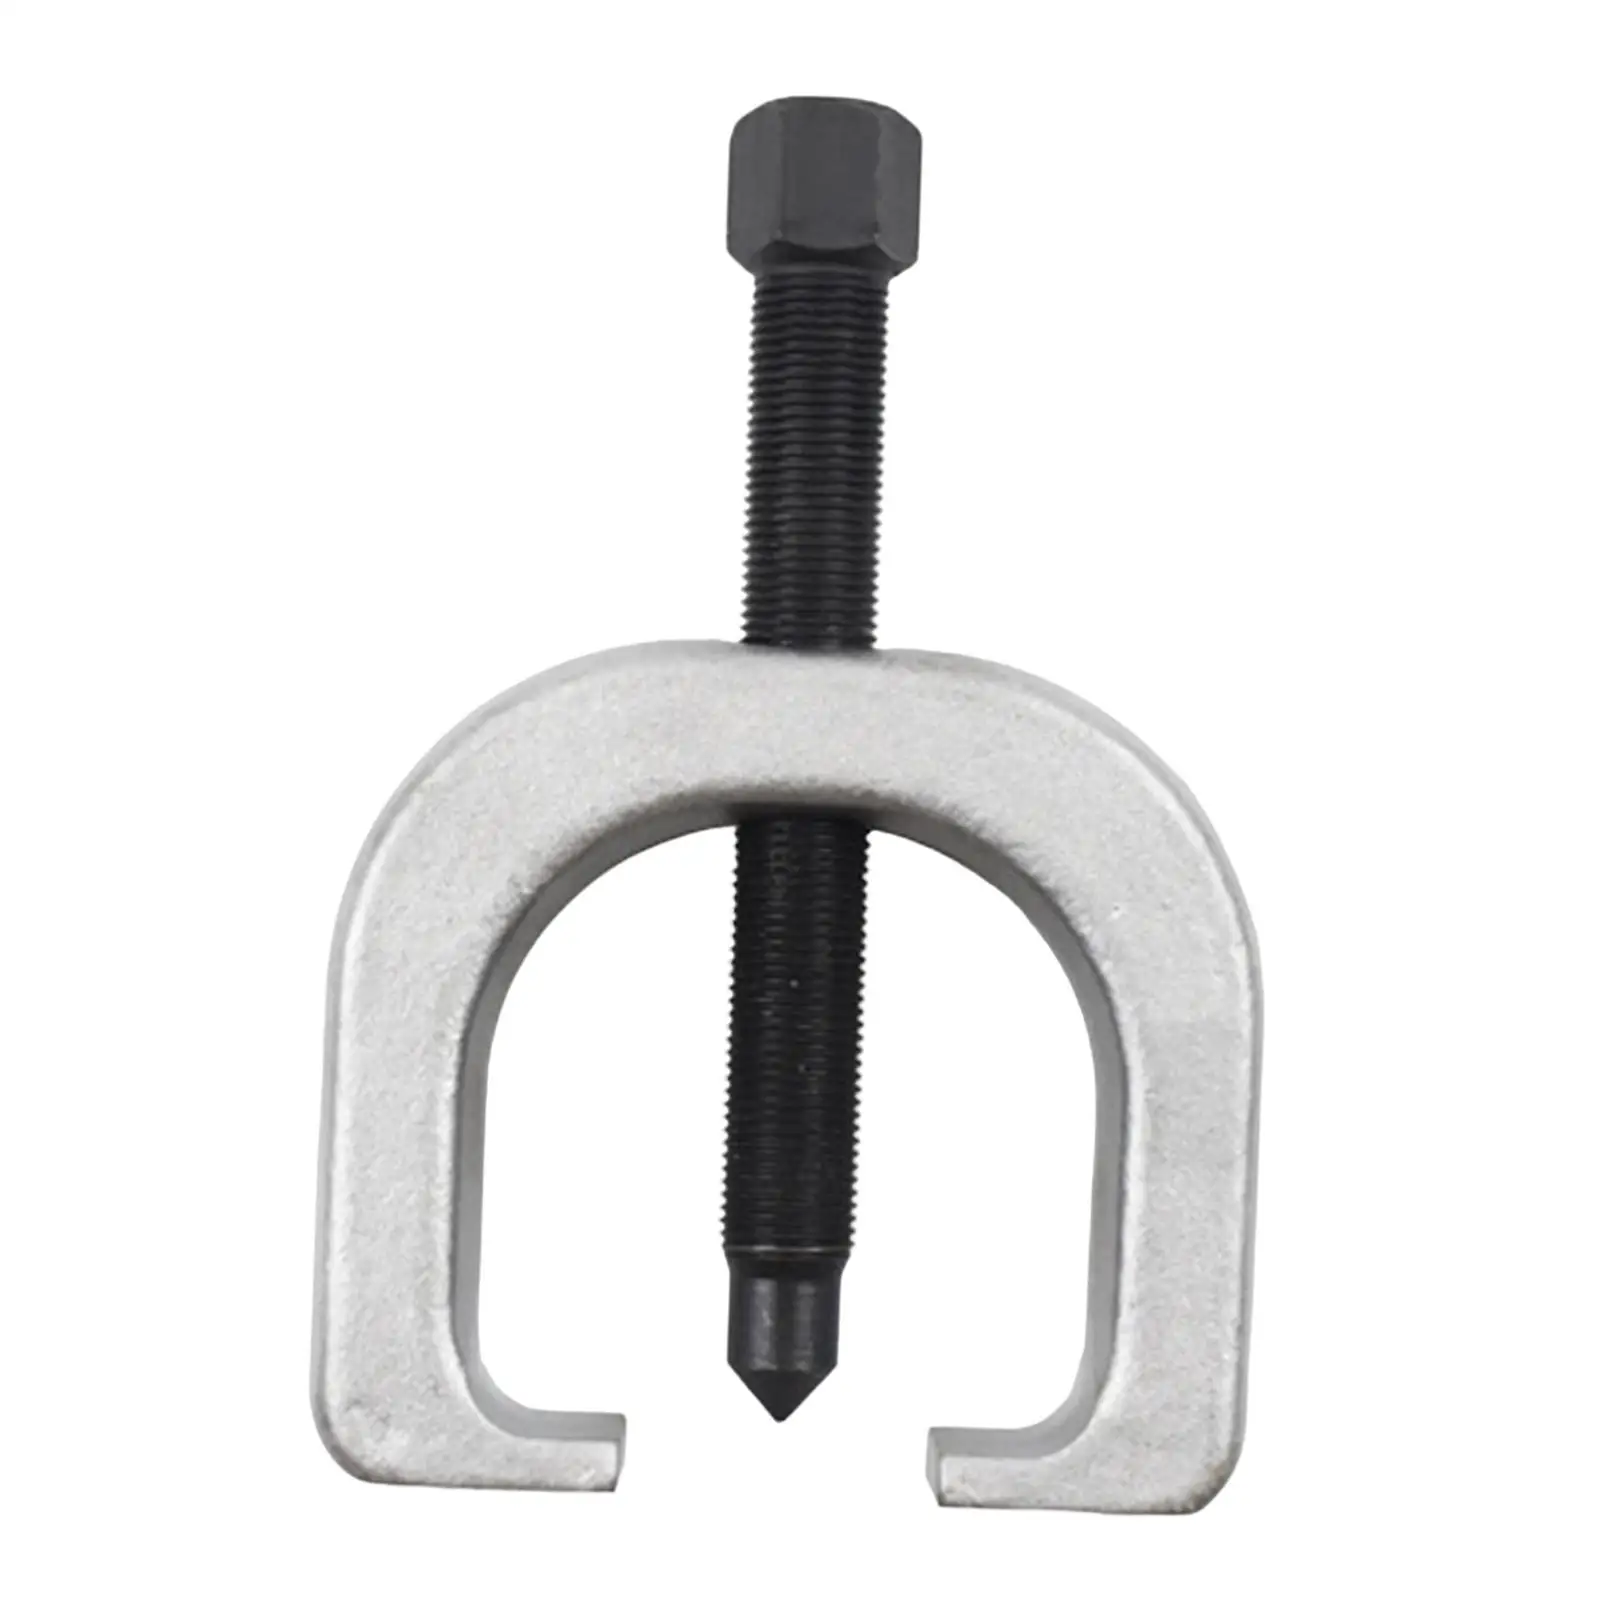 Slack Adjuster Puller High Performance Sturdy Carbon Steel Maintenance Tool Removal Tool for Trailers Trucks